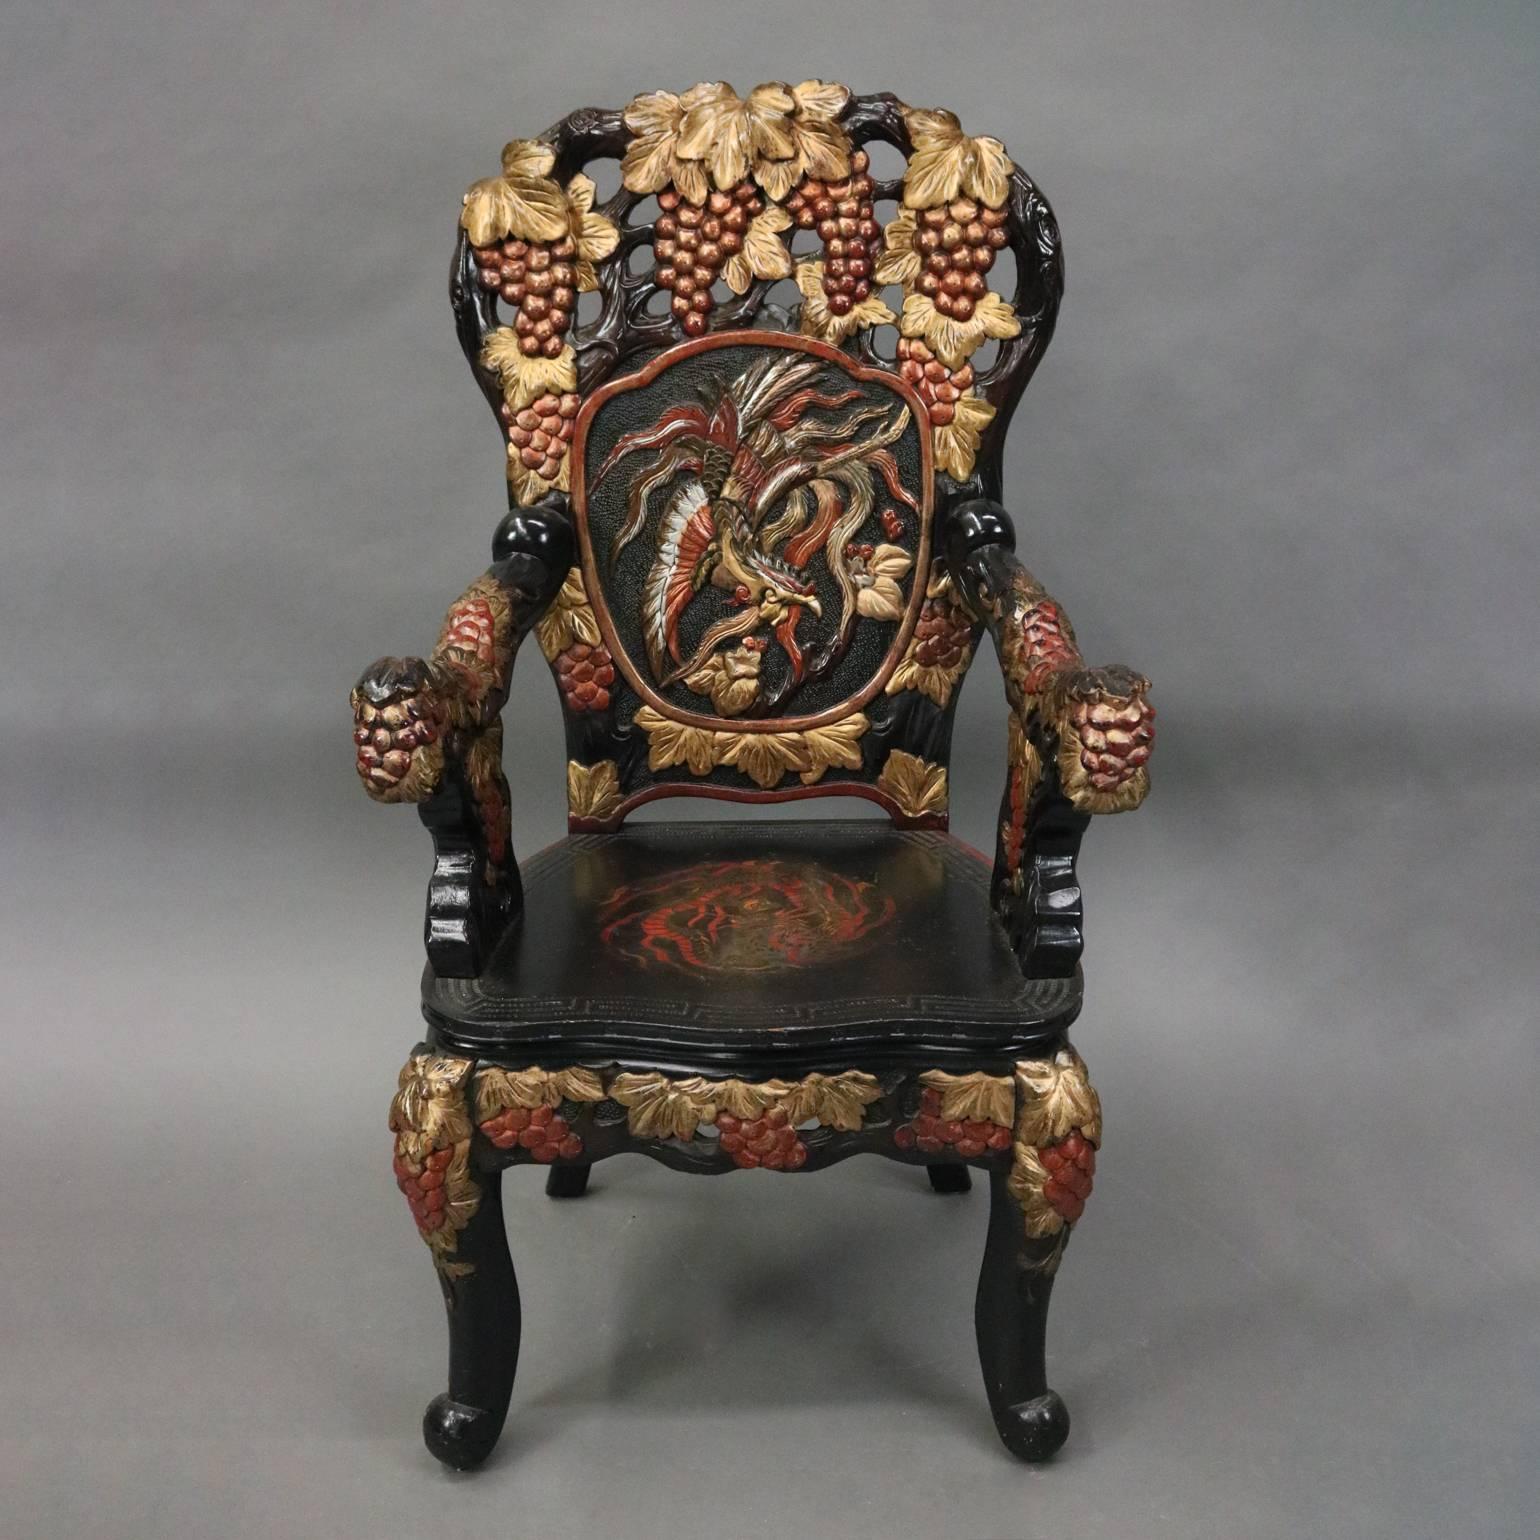 Vintage heavily carved hardwood ebonized and polychromed Chinese throne chair features pierced back with central medallion of phoenix surrounded by grape laden vines, seat with central dragon, en verso back with central medallion of feathers